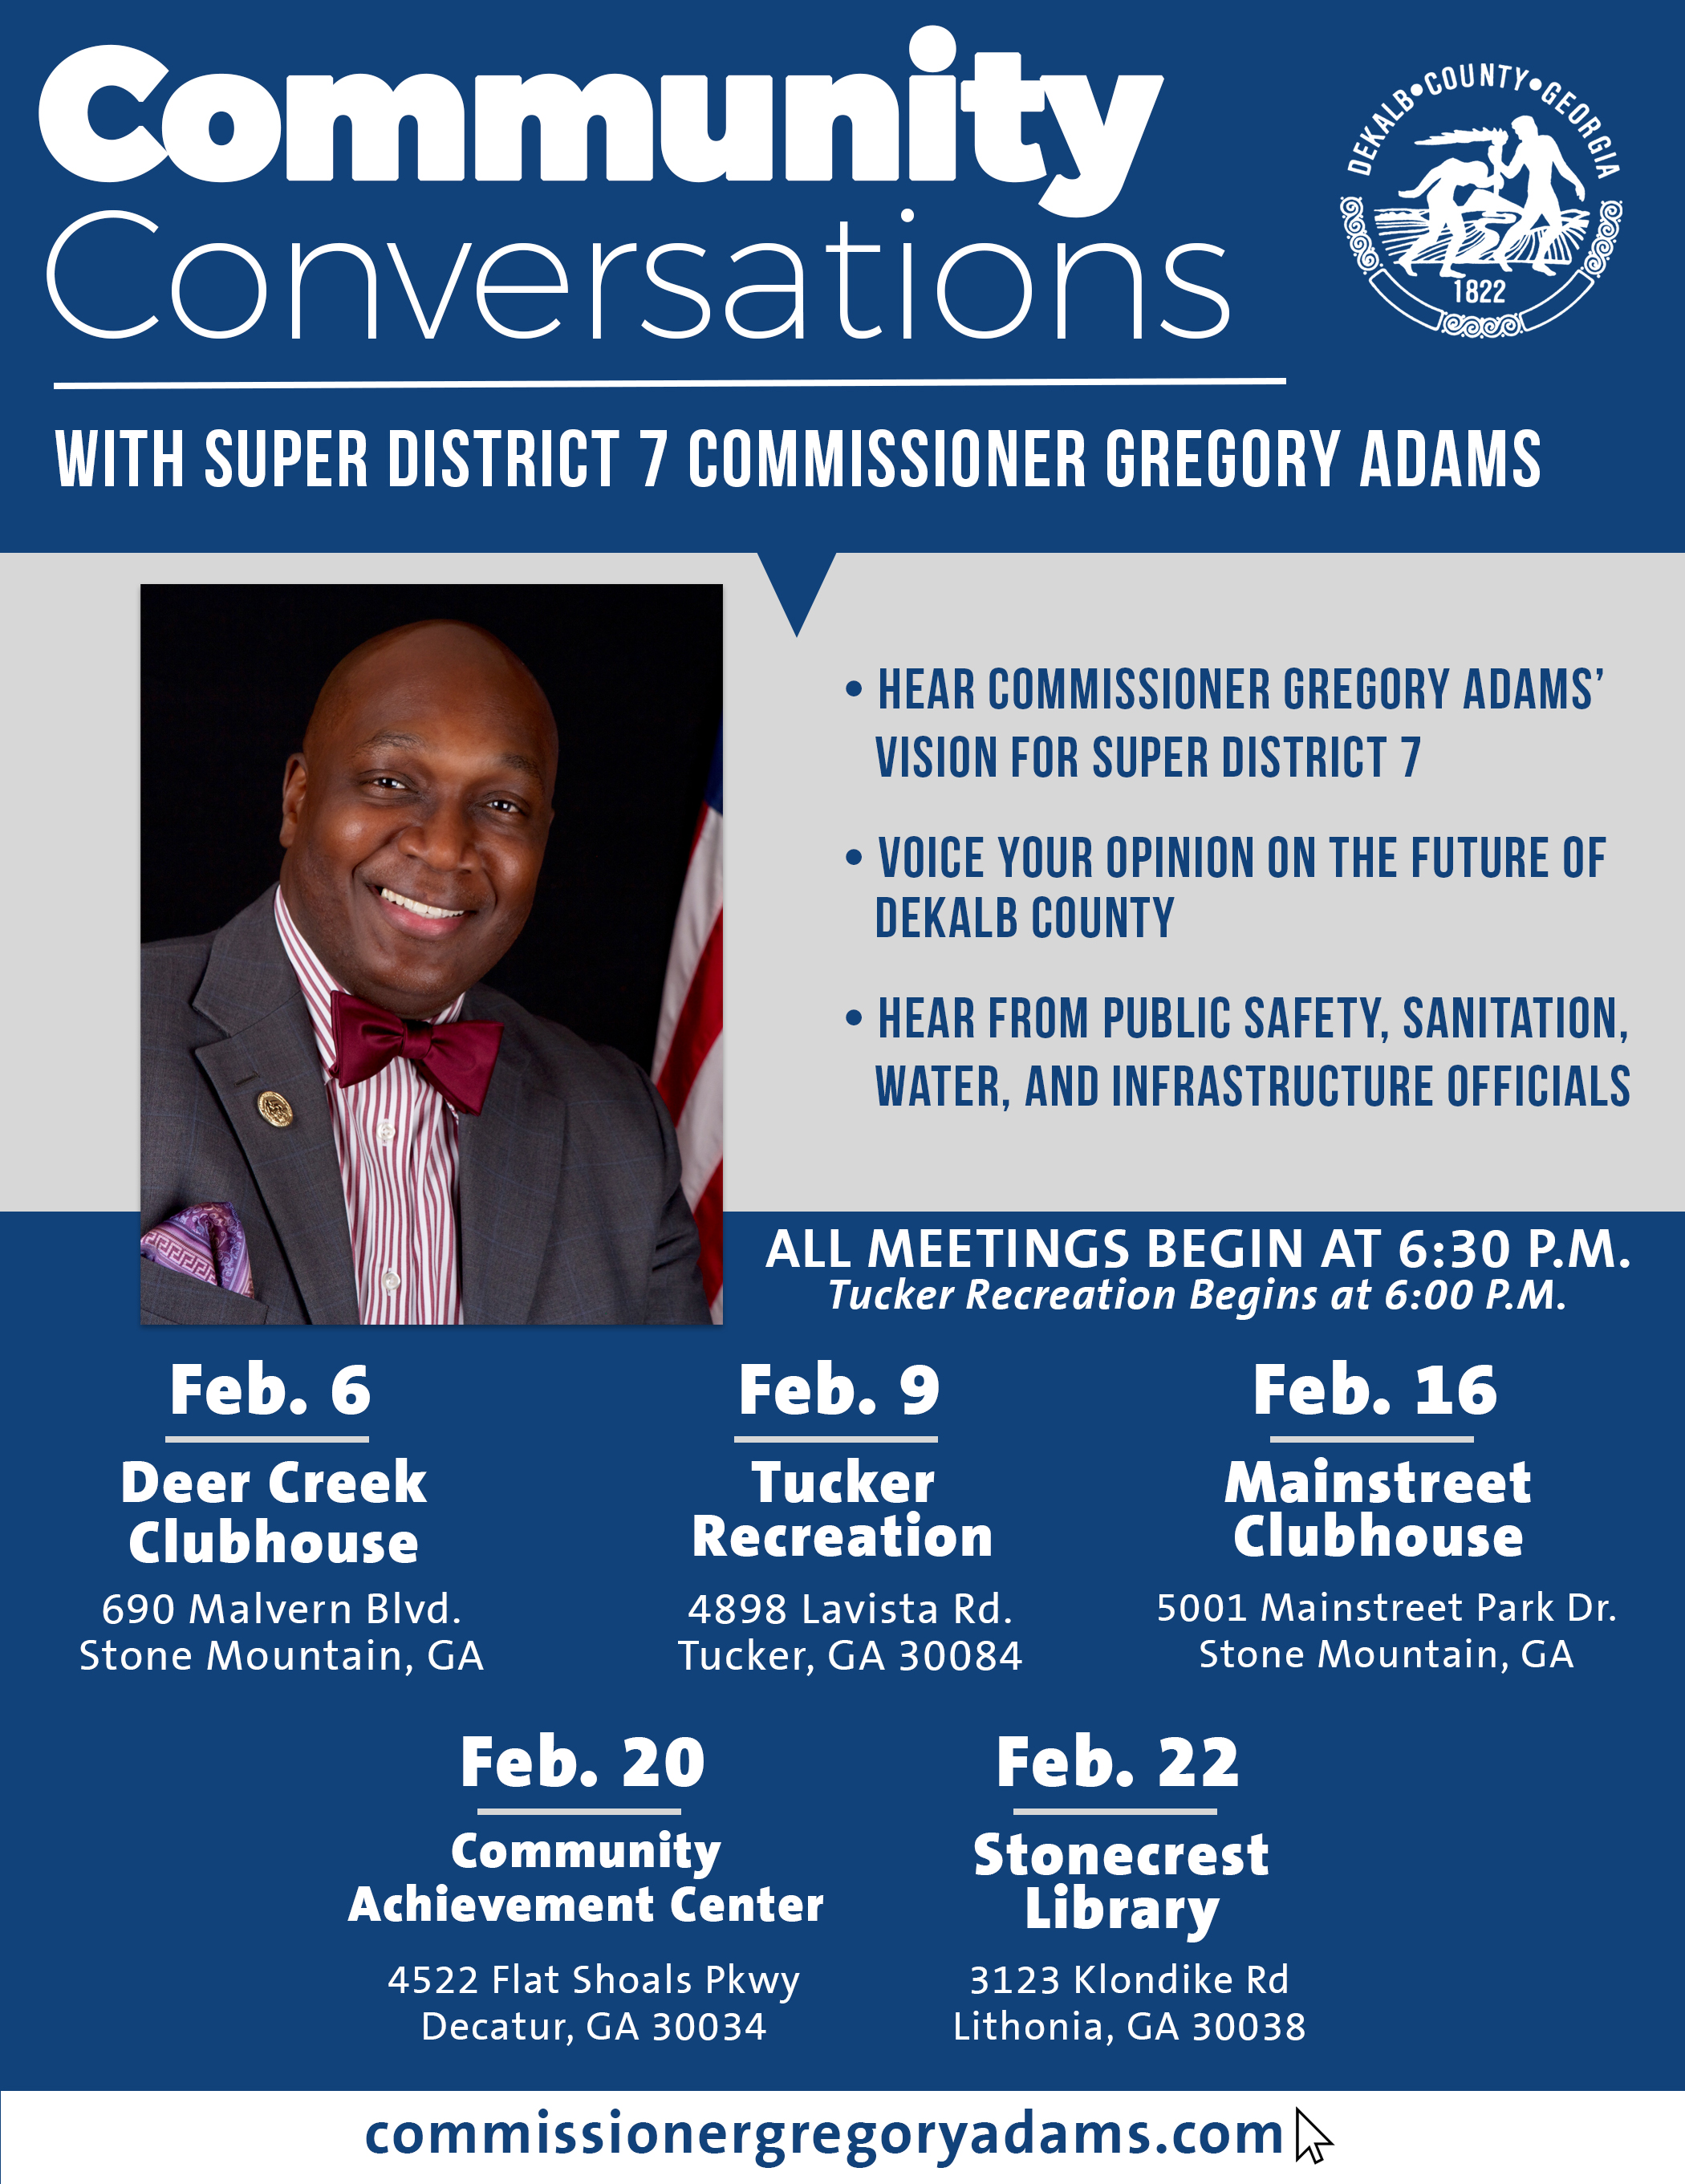 Community Conversations With Super District 7